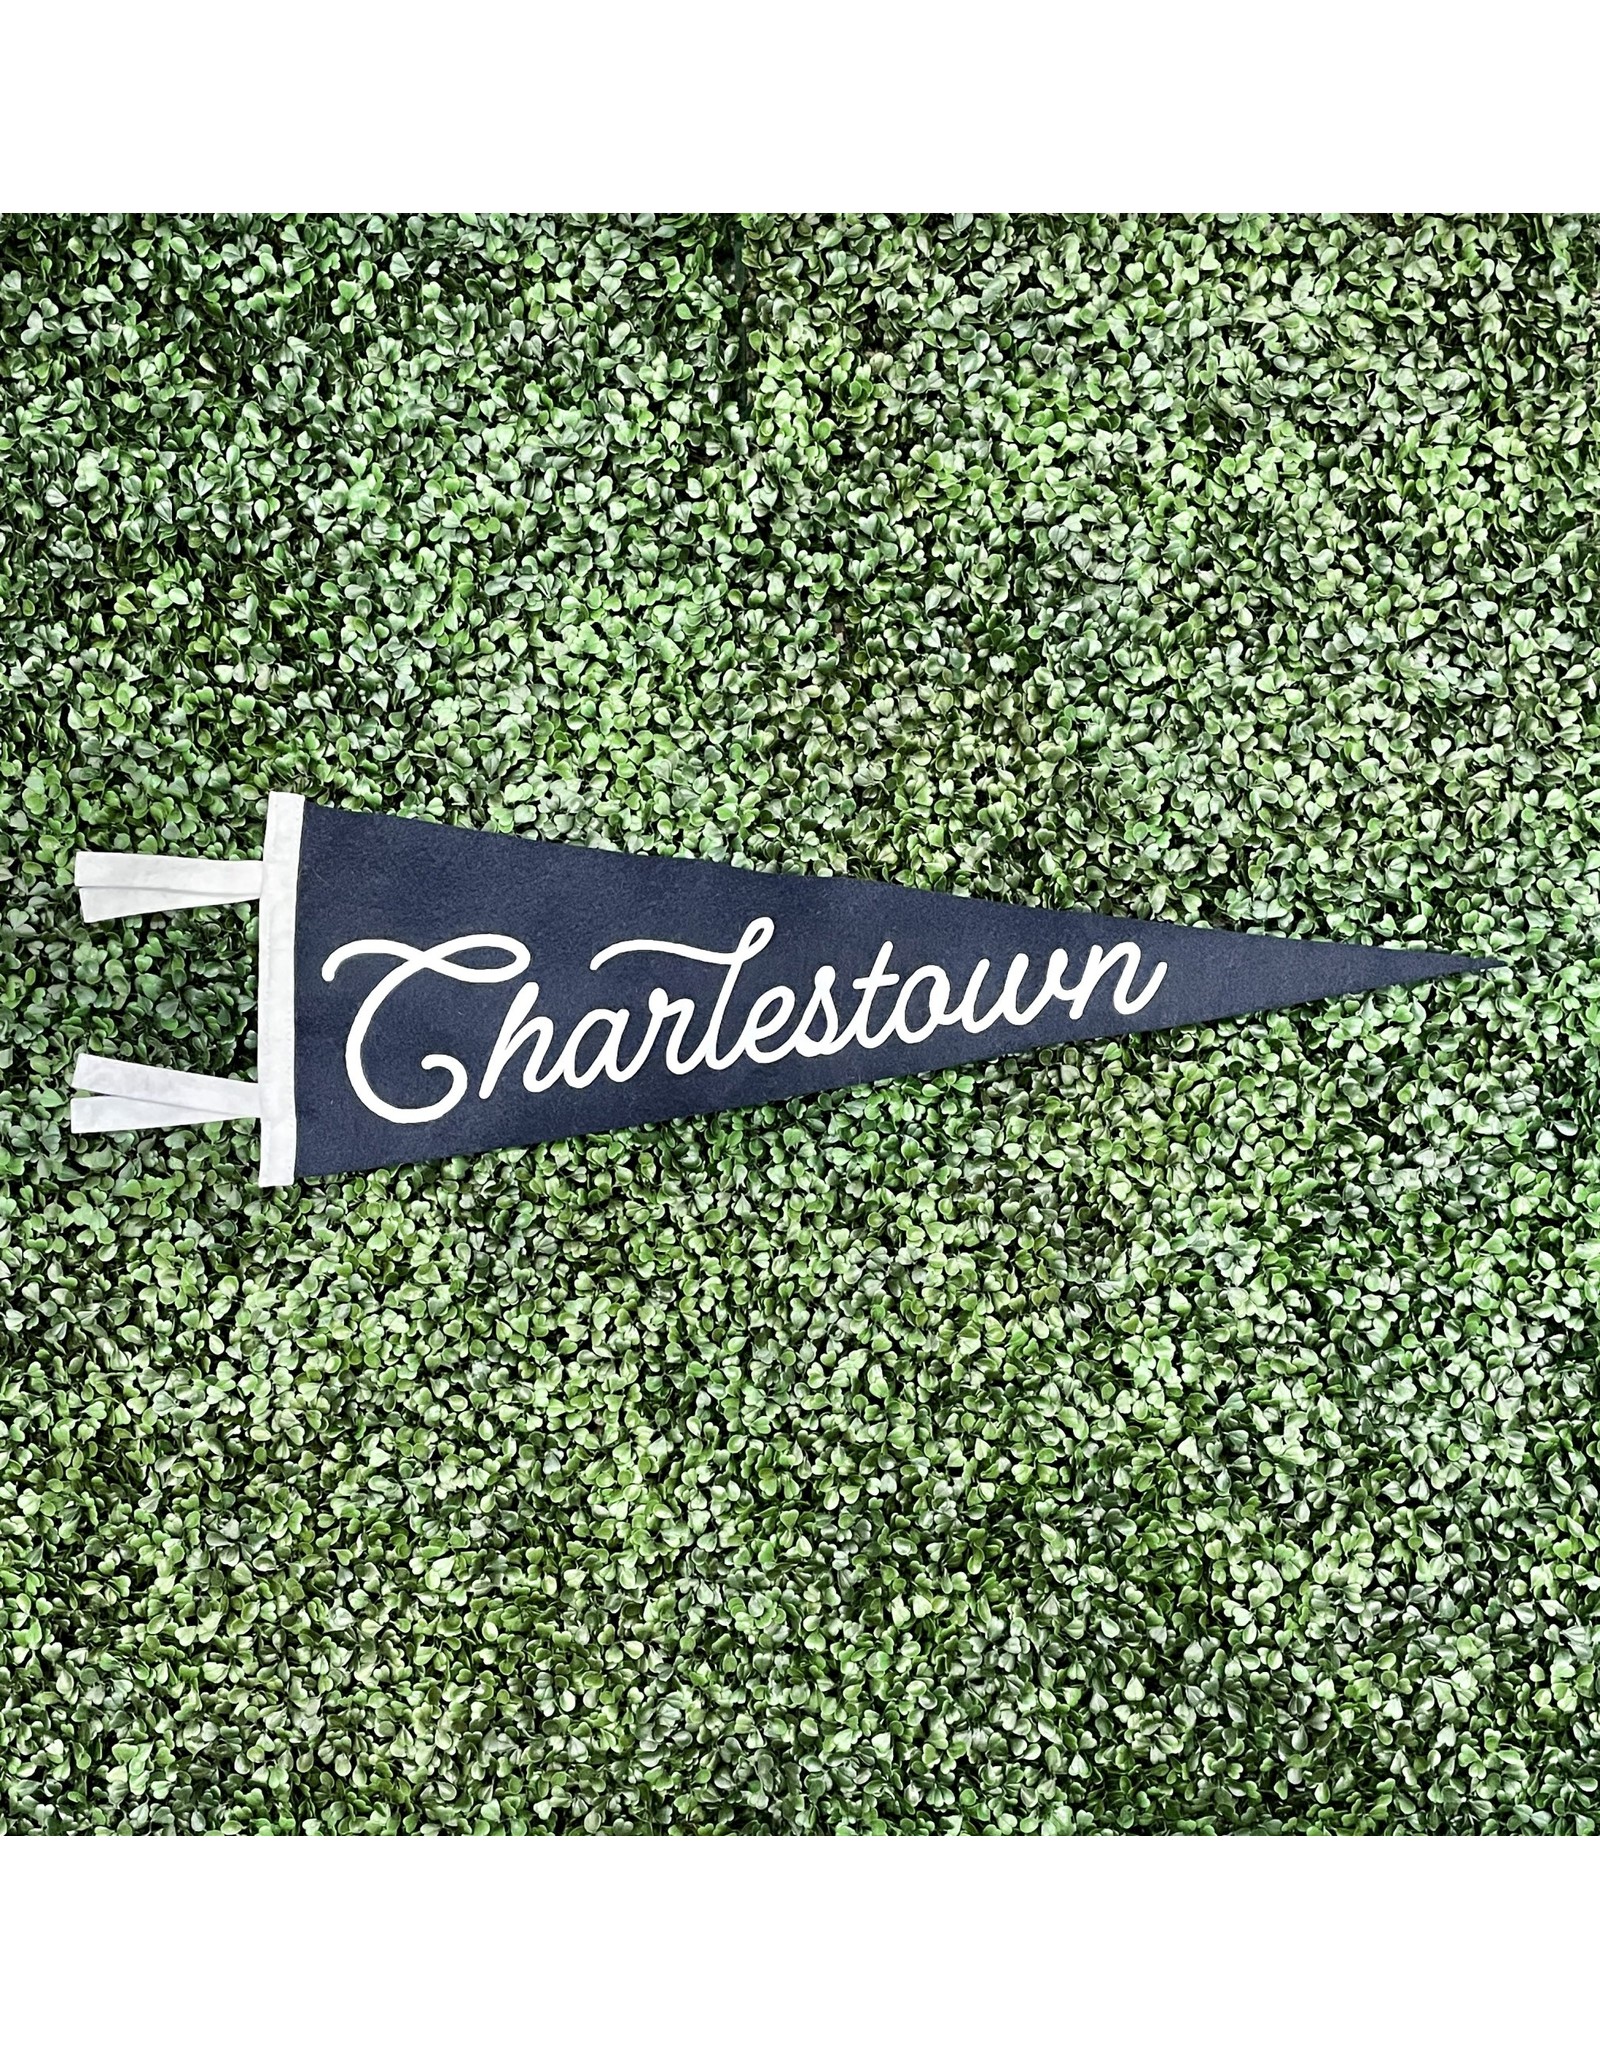 Oxford Pennant Charlestown Pennant in Navy by Oxford Pennant